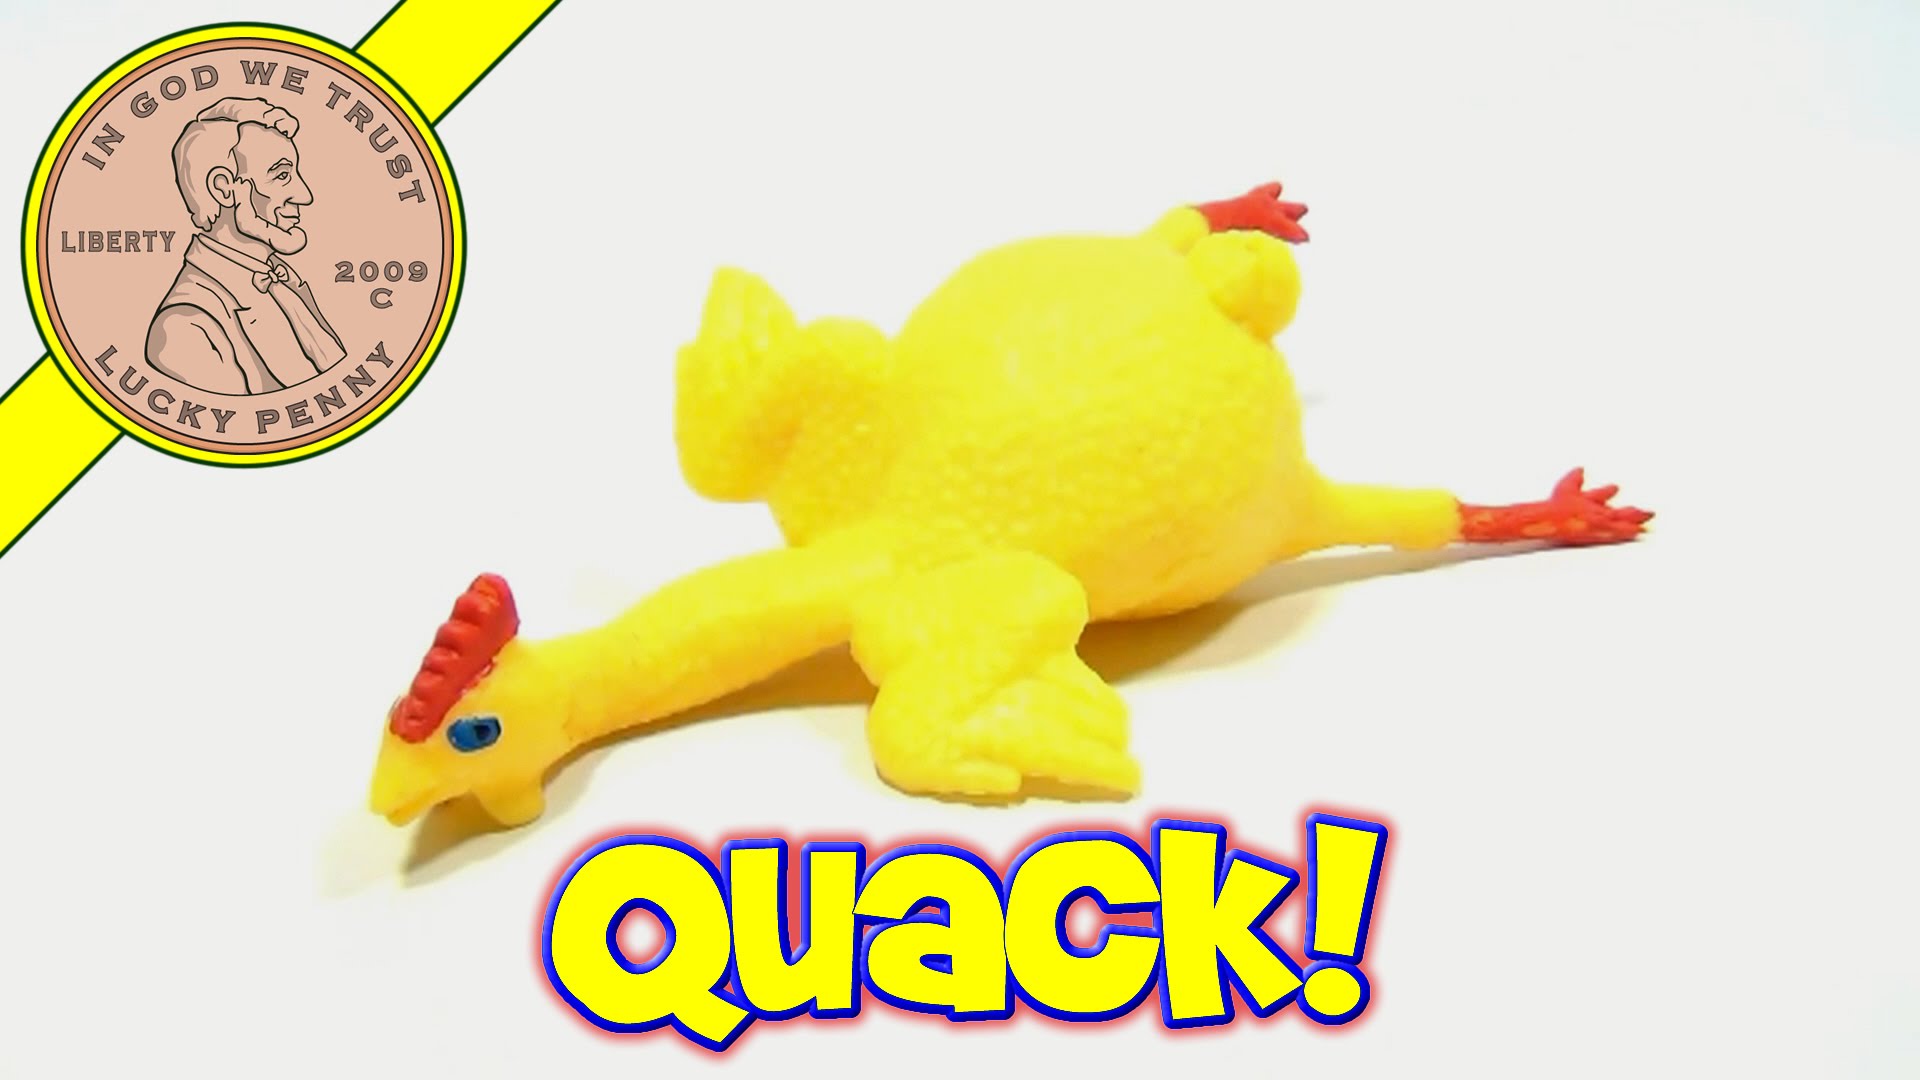 Funny Rubber Chicken Squishy Bulging Egg Stress Toy Review - YouTube